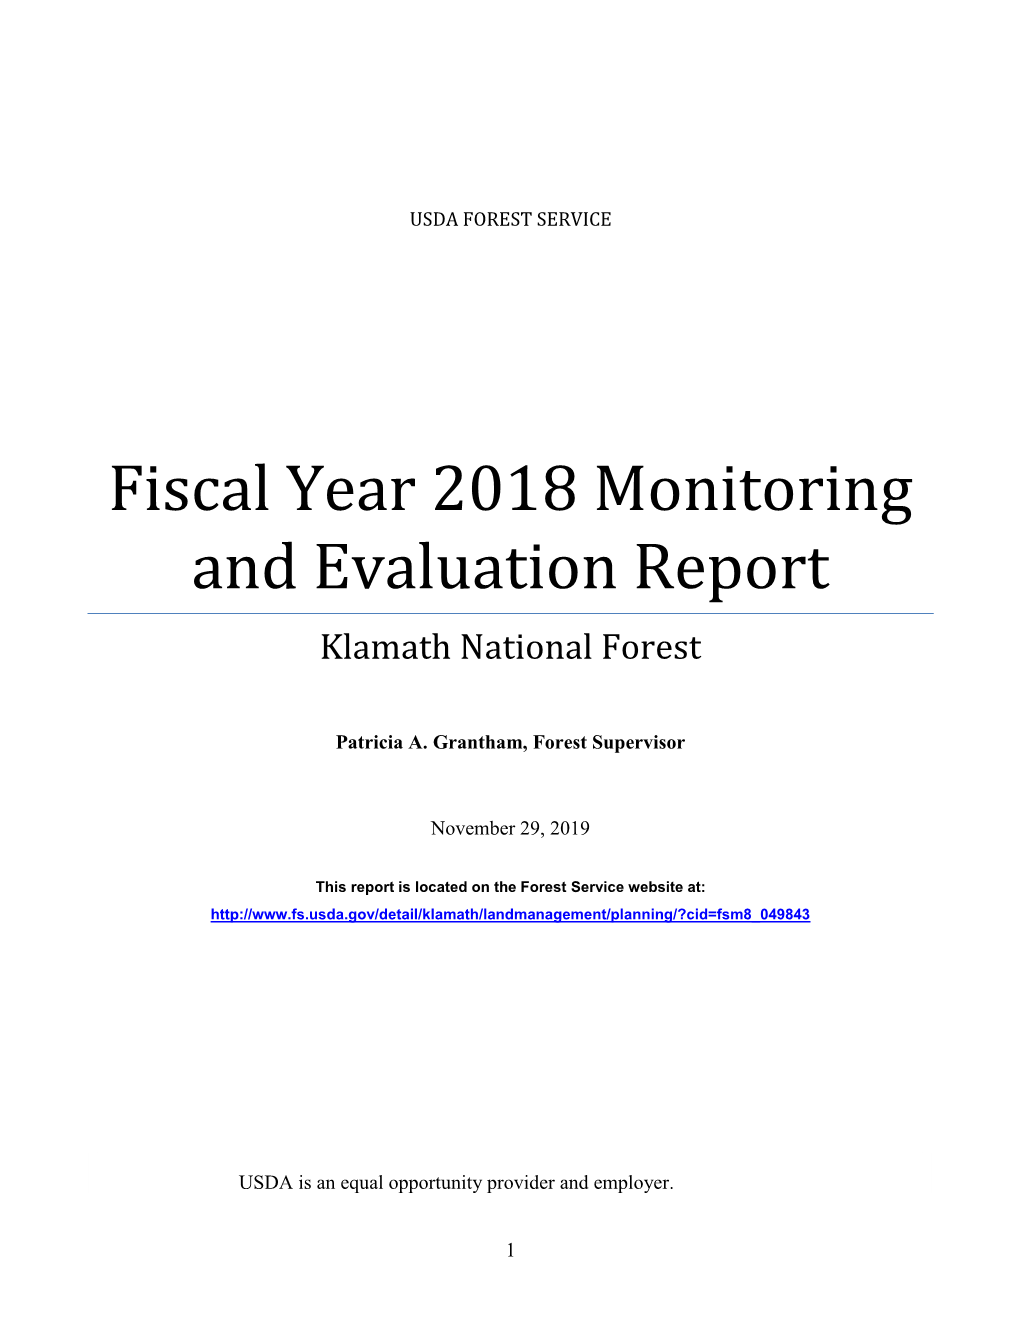 FY 2018 Monitoring Report